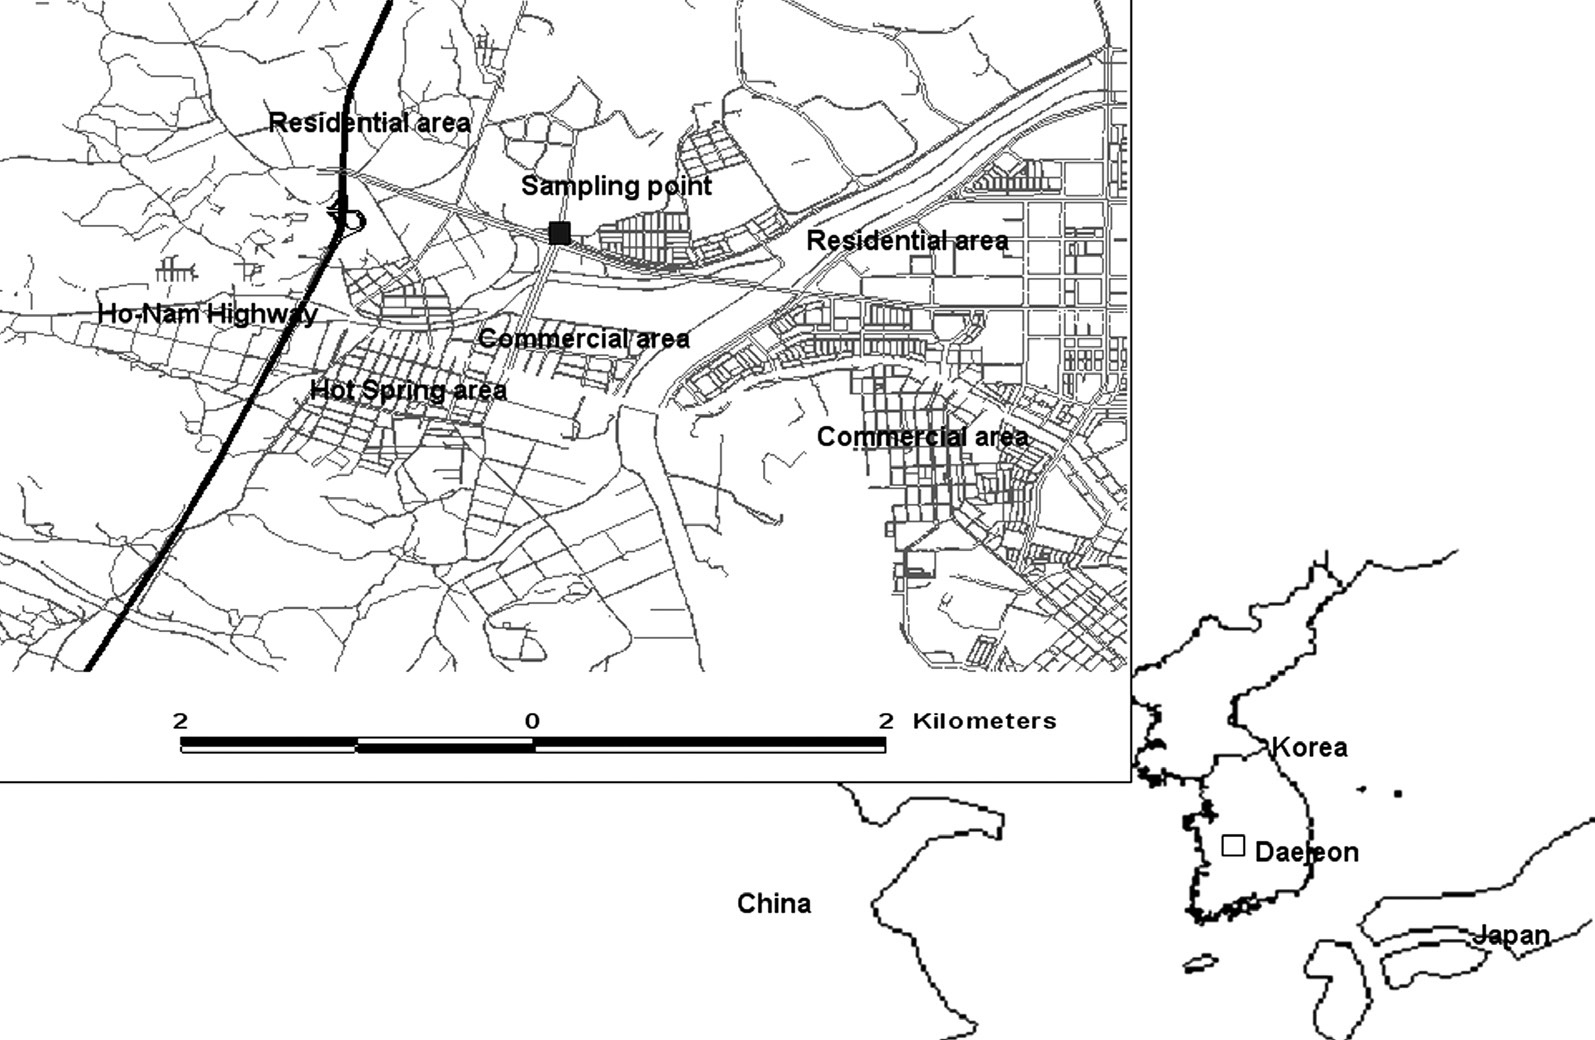 Areal maps for both Daejeon in Korea and Gung-dong sampling site.